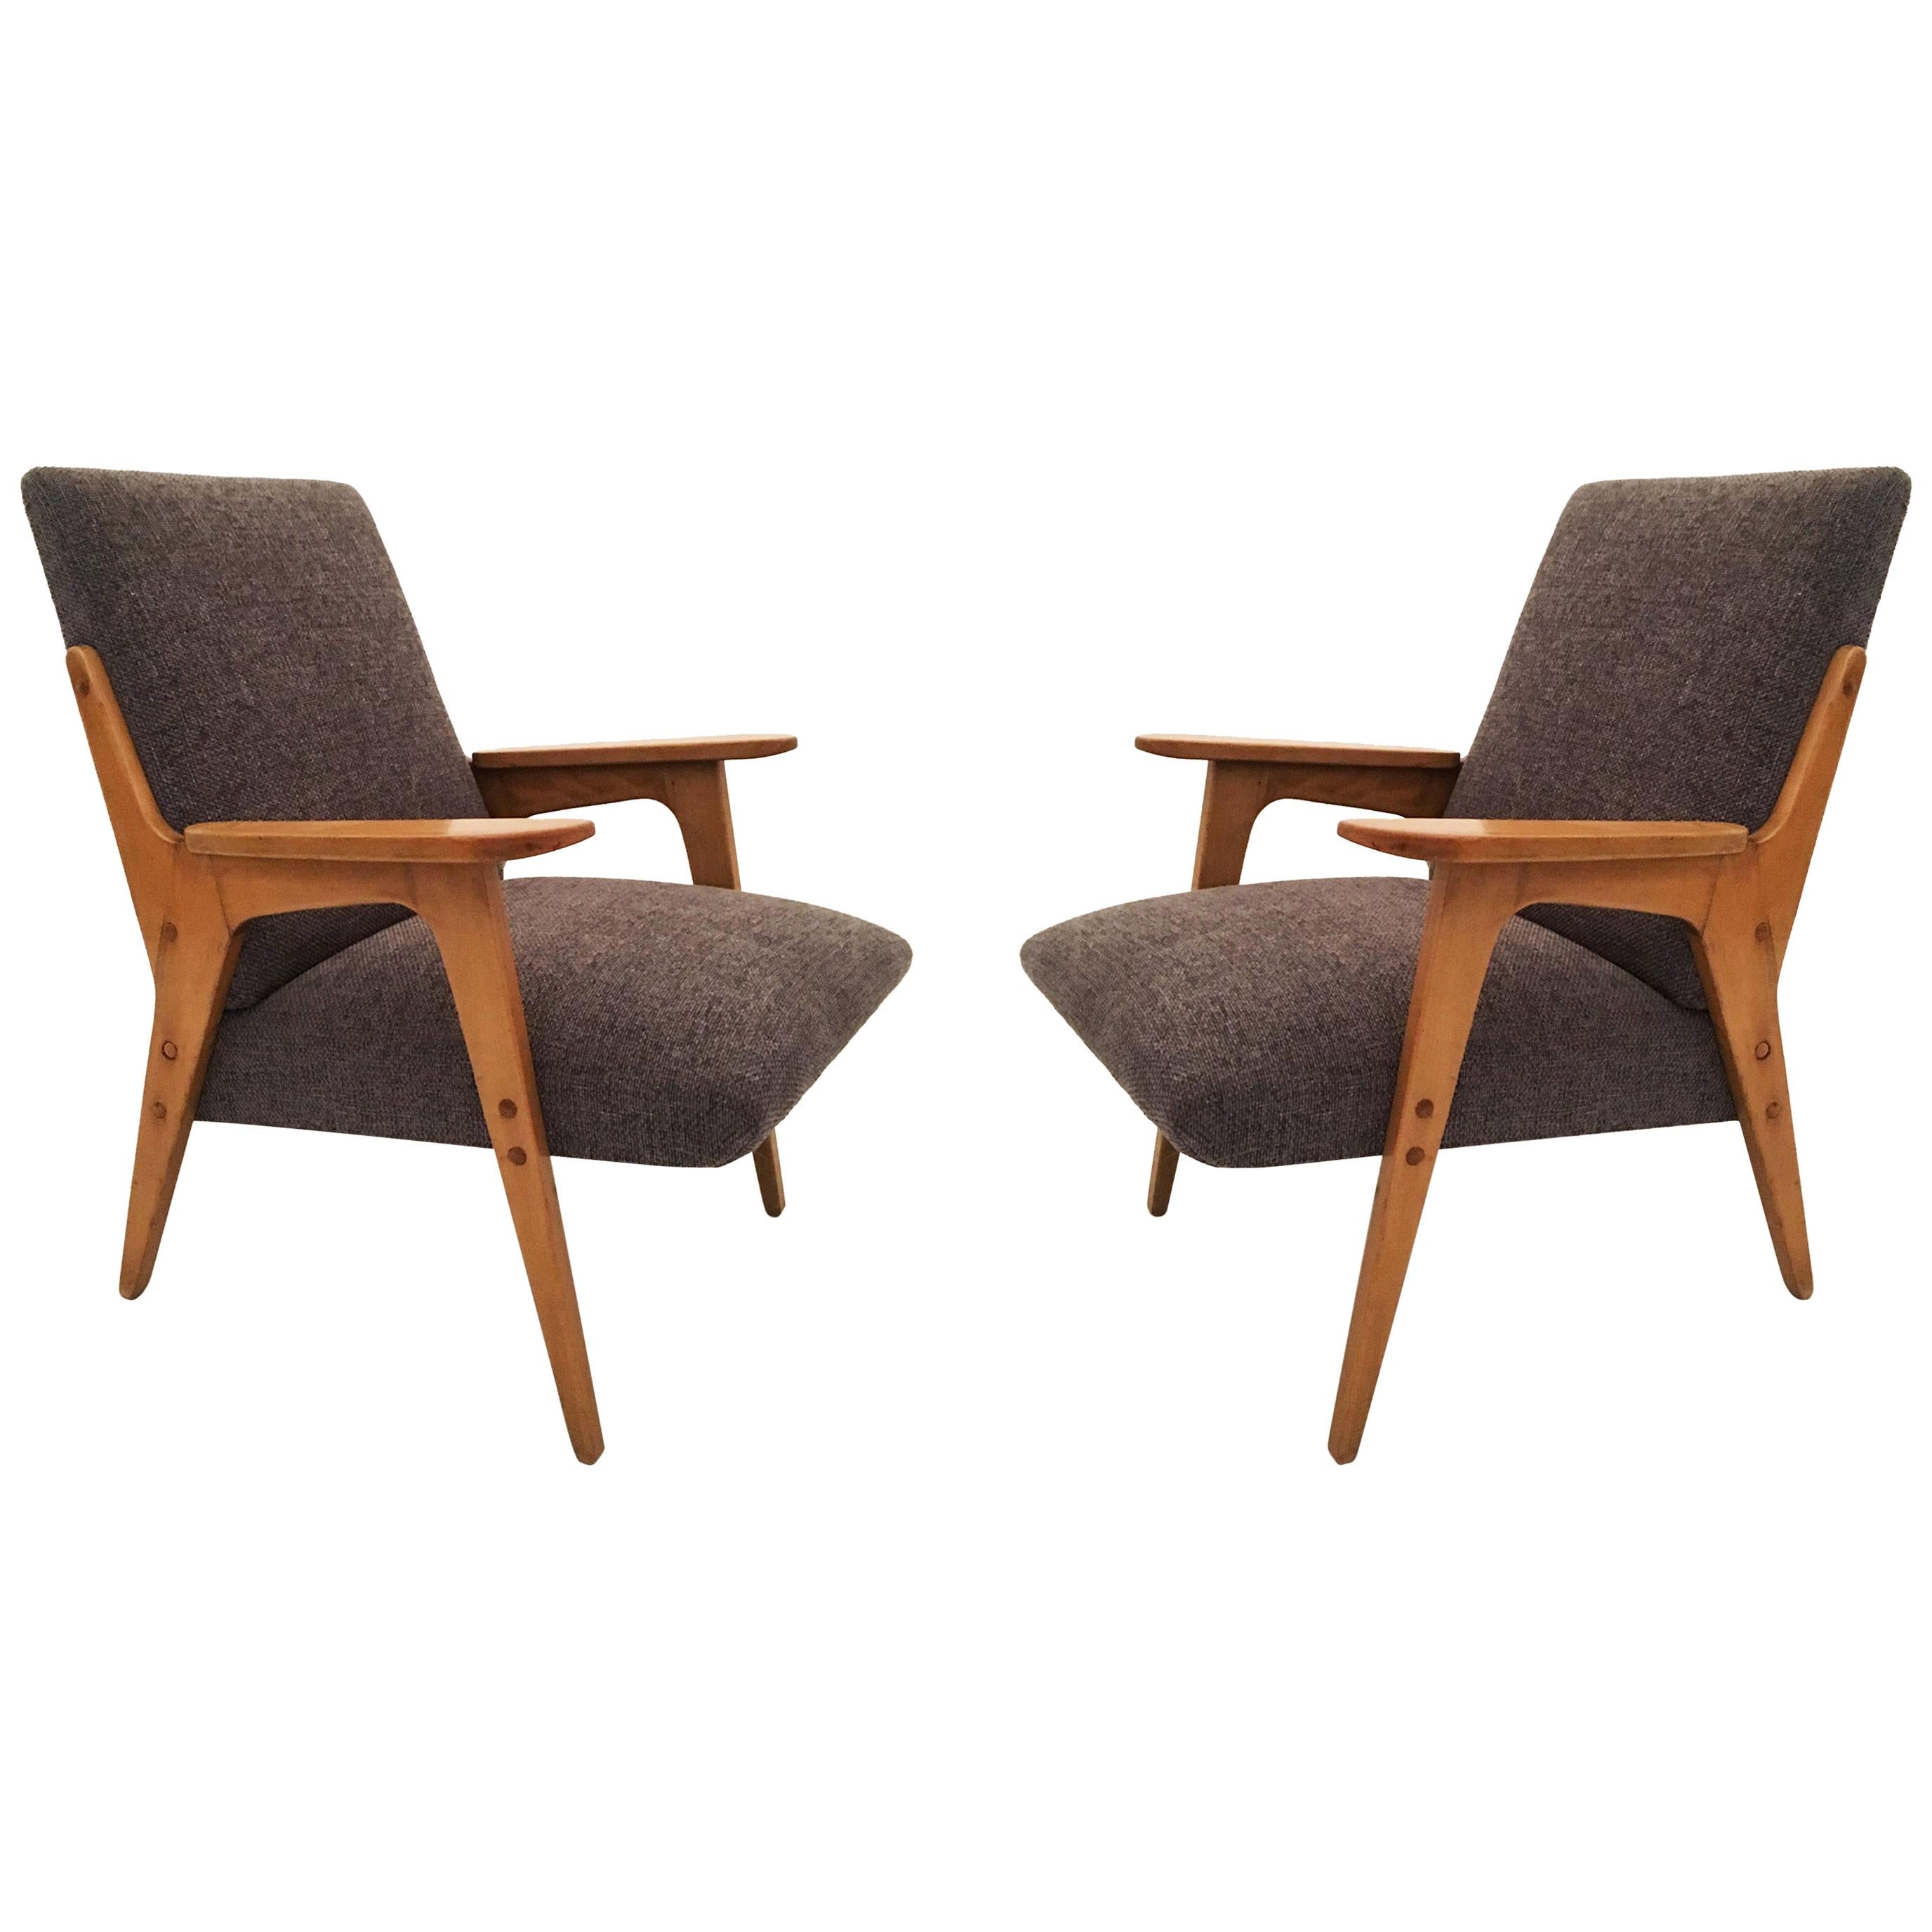 Franz Schuster Lounge Chairs "Architect" Pair, Austria, 1950s For Sale